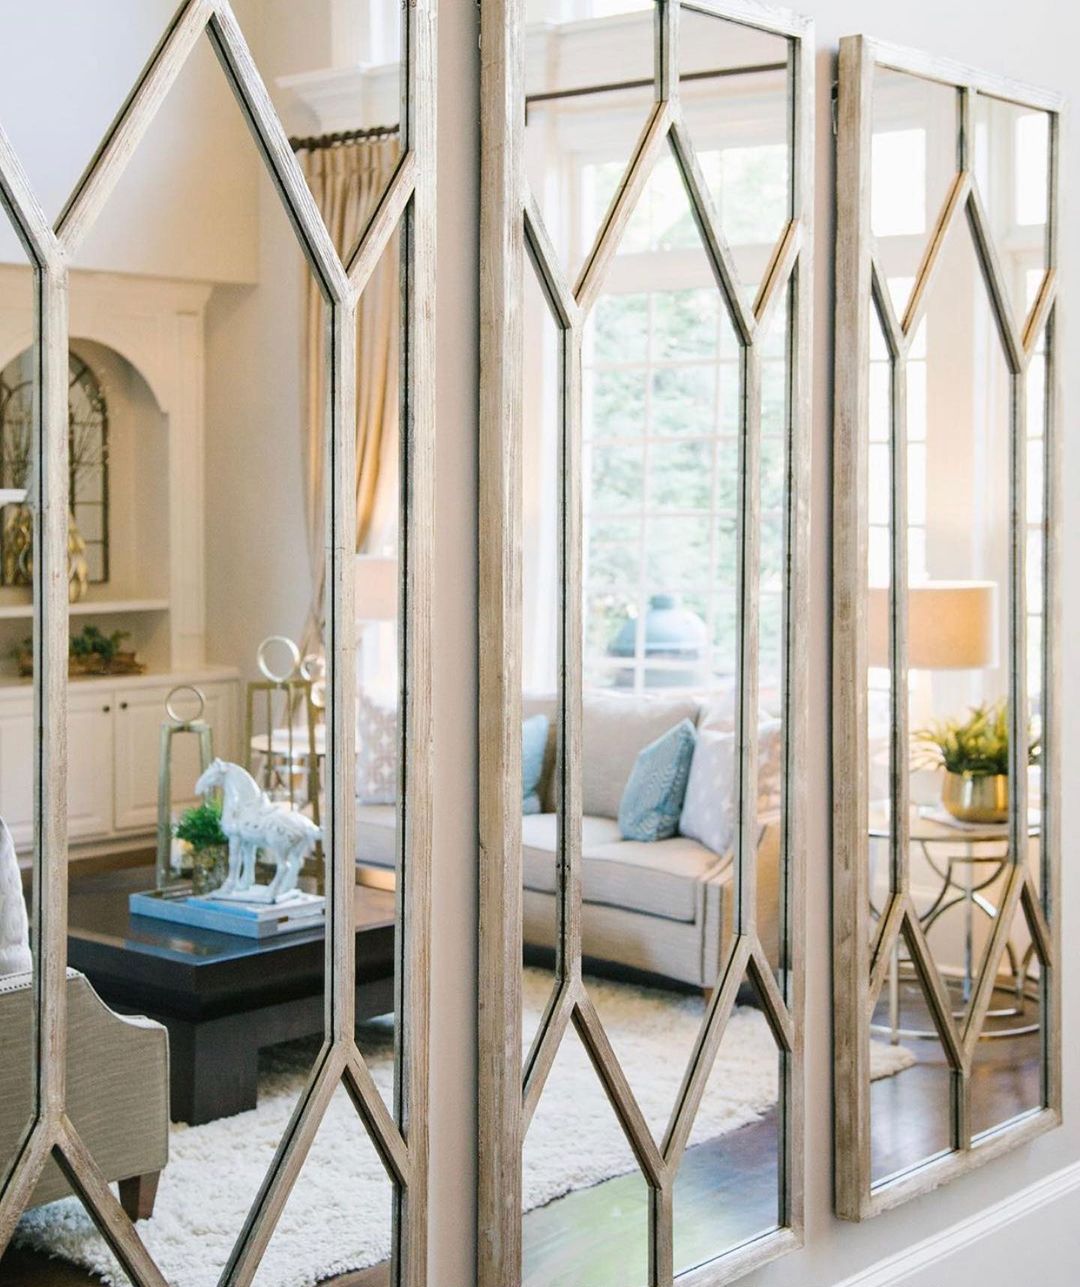 How to Make Your Space Look Stunning Using a Wall Mirror